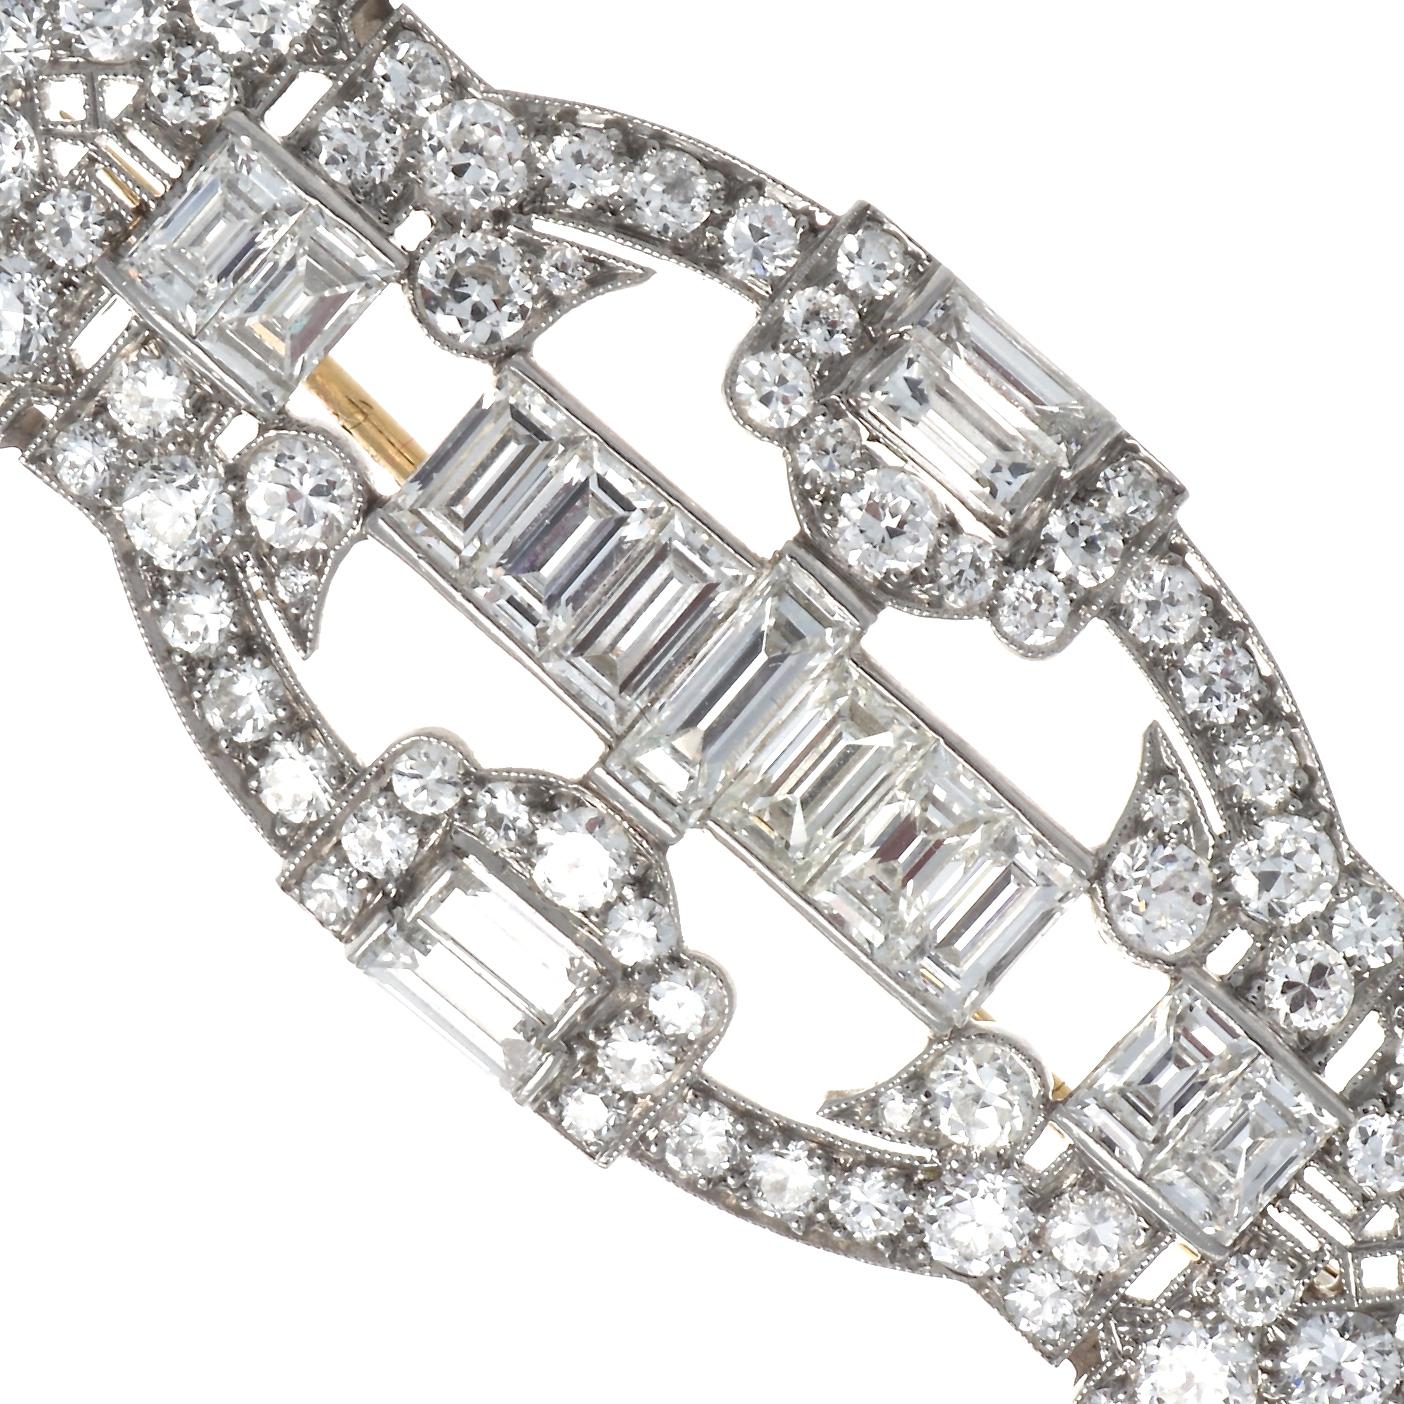 The perfection of Tiffany & Co. in classic Art Deco style; a platinum and diamond brooch. Approximately six carats of diamonds with 15 emerald cut diamonds weighing approximately 2.75 carats, F-G color and VS+ clarity.  Beautifully surrounded by 64